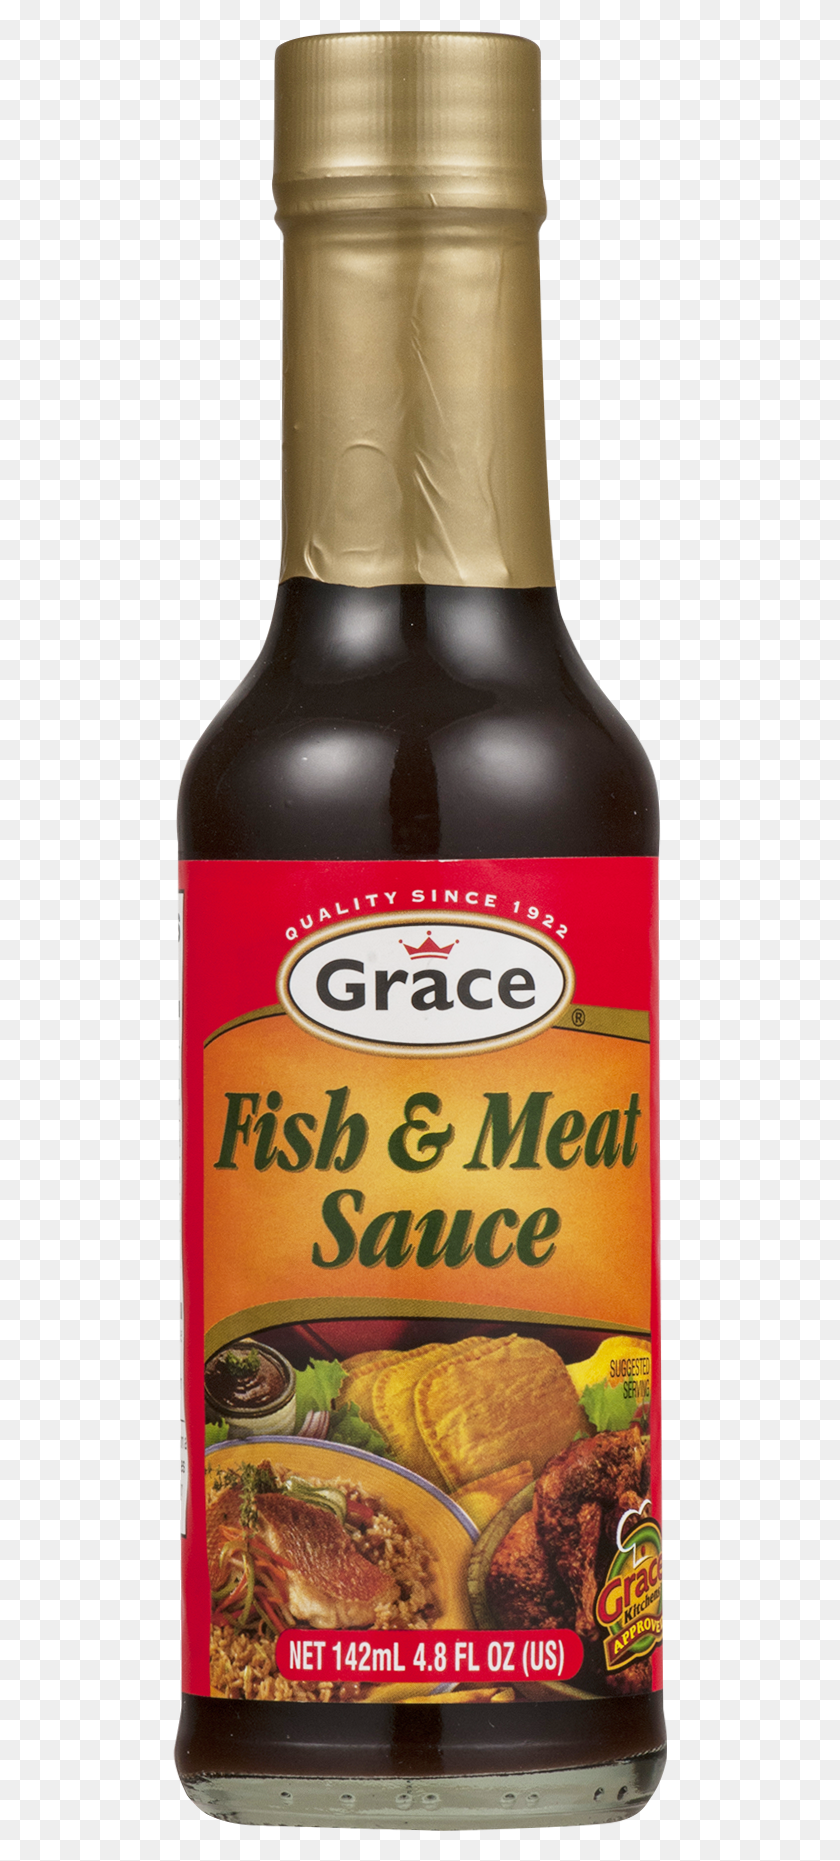 495x1801 Gracekennedy Grace Fish Amp Meat Sauce Australia Soy Sauce Label, Beer, Alcohol, Beverage HD PNG Download